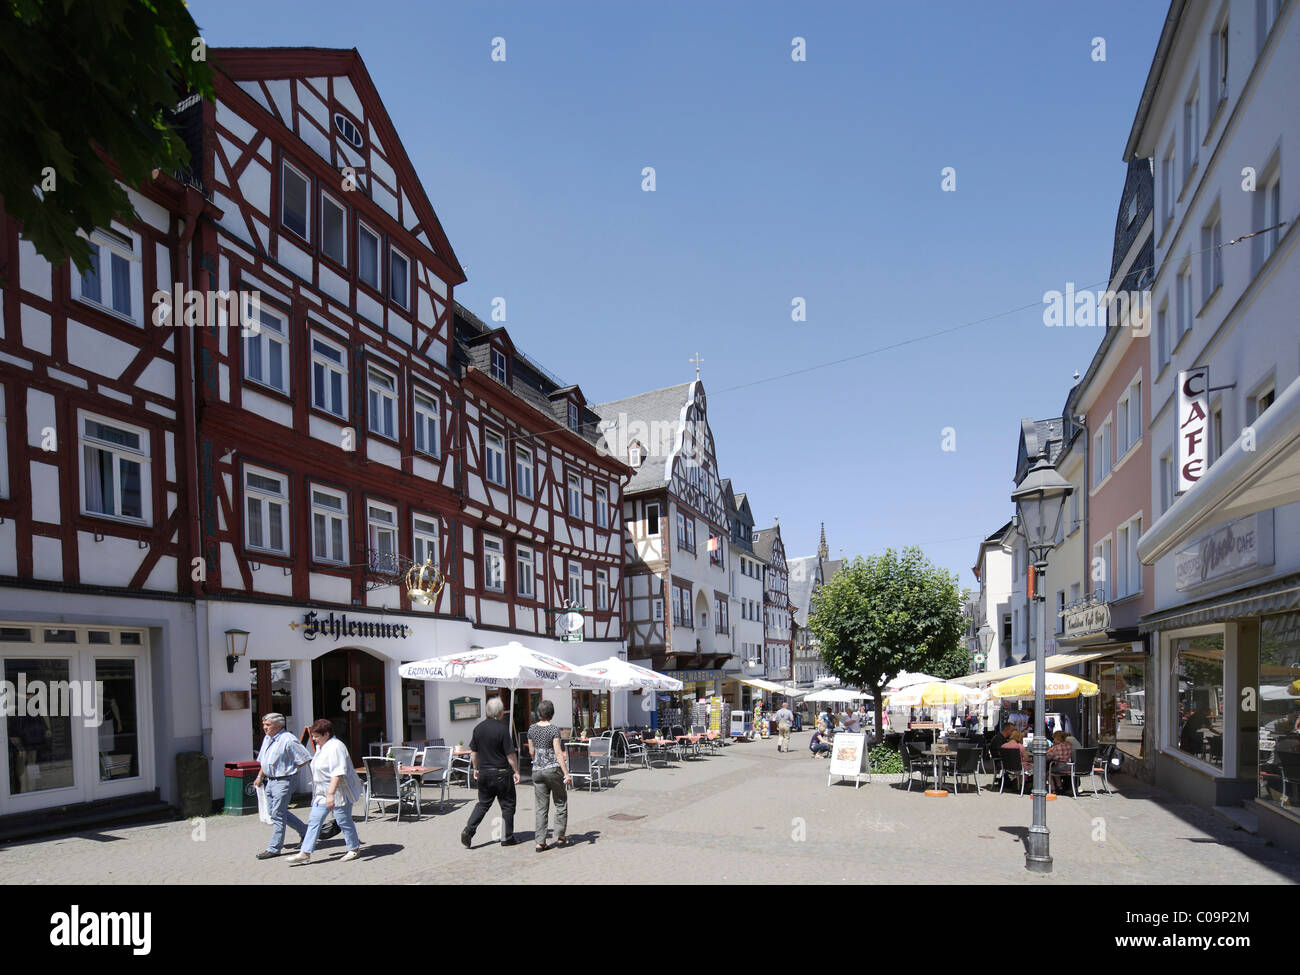 Half-timbered houses in the old town of Montabaur, Rhineland-Palatinate, Germany, Europe Stock Photo